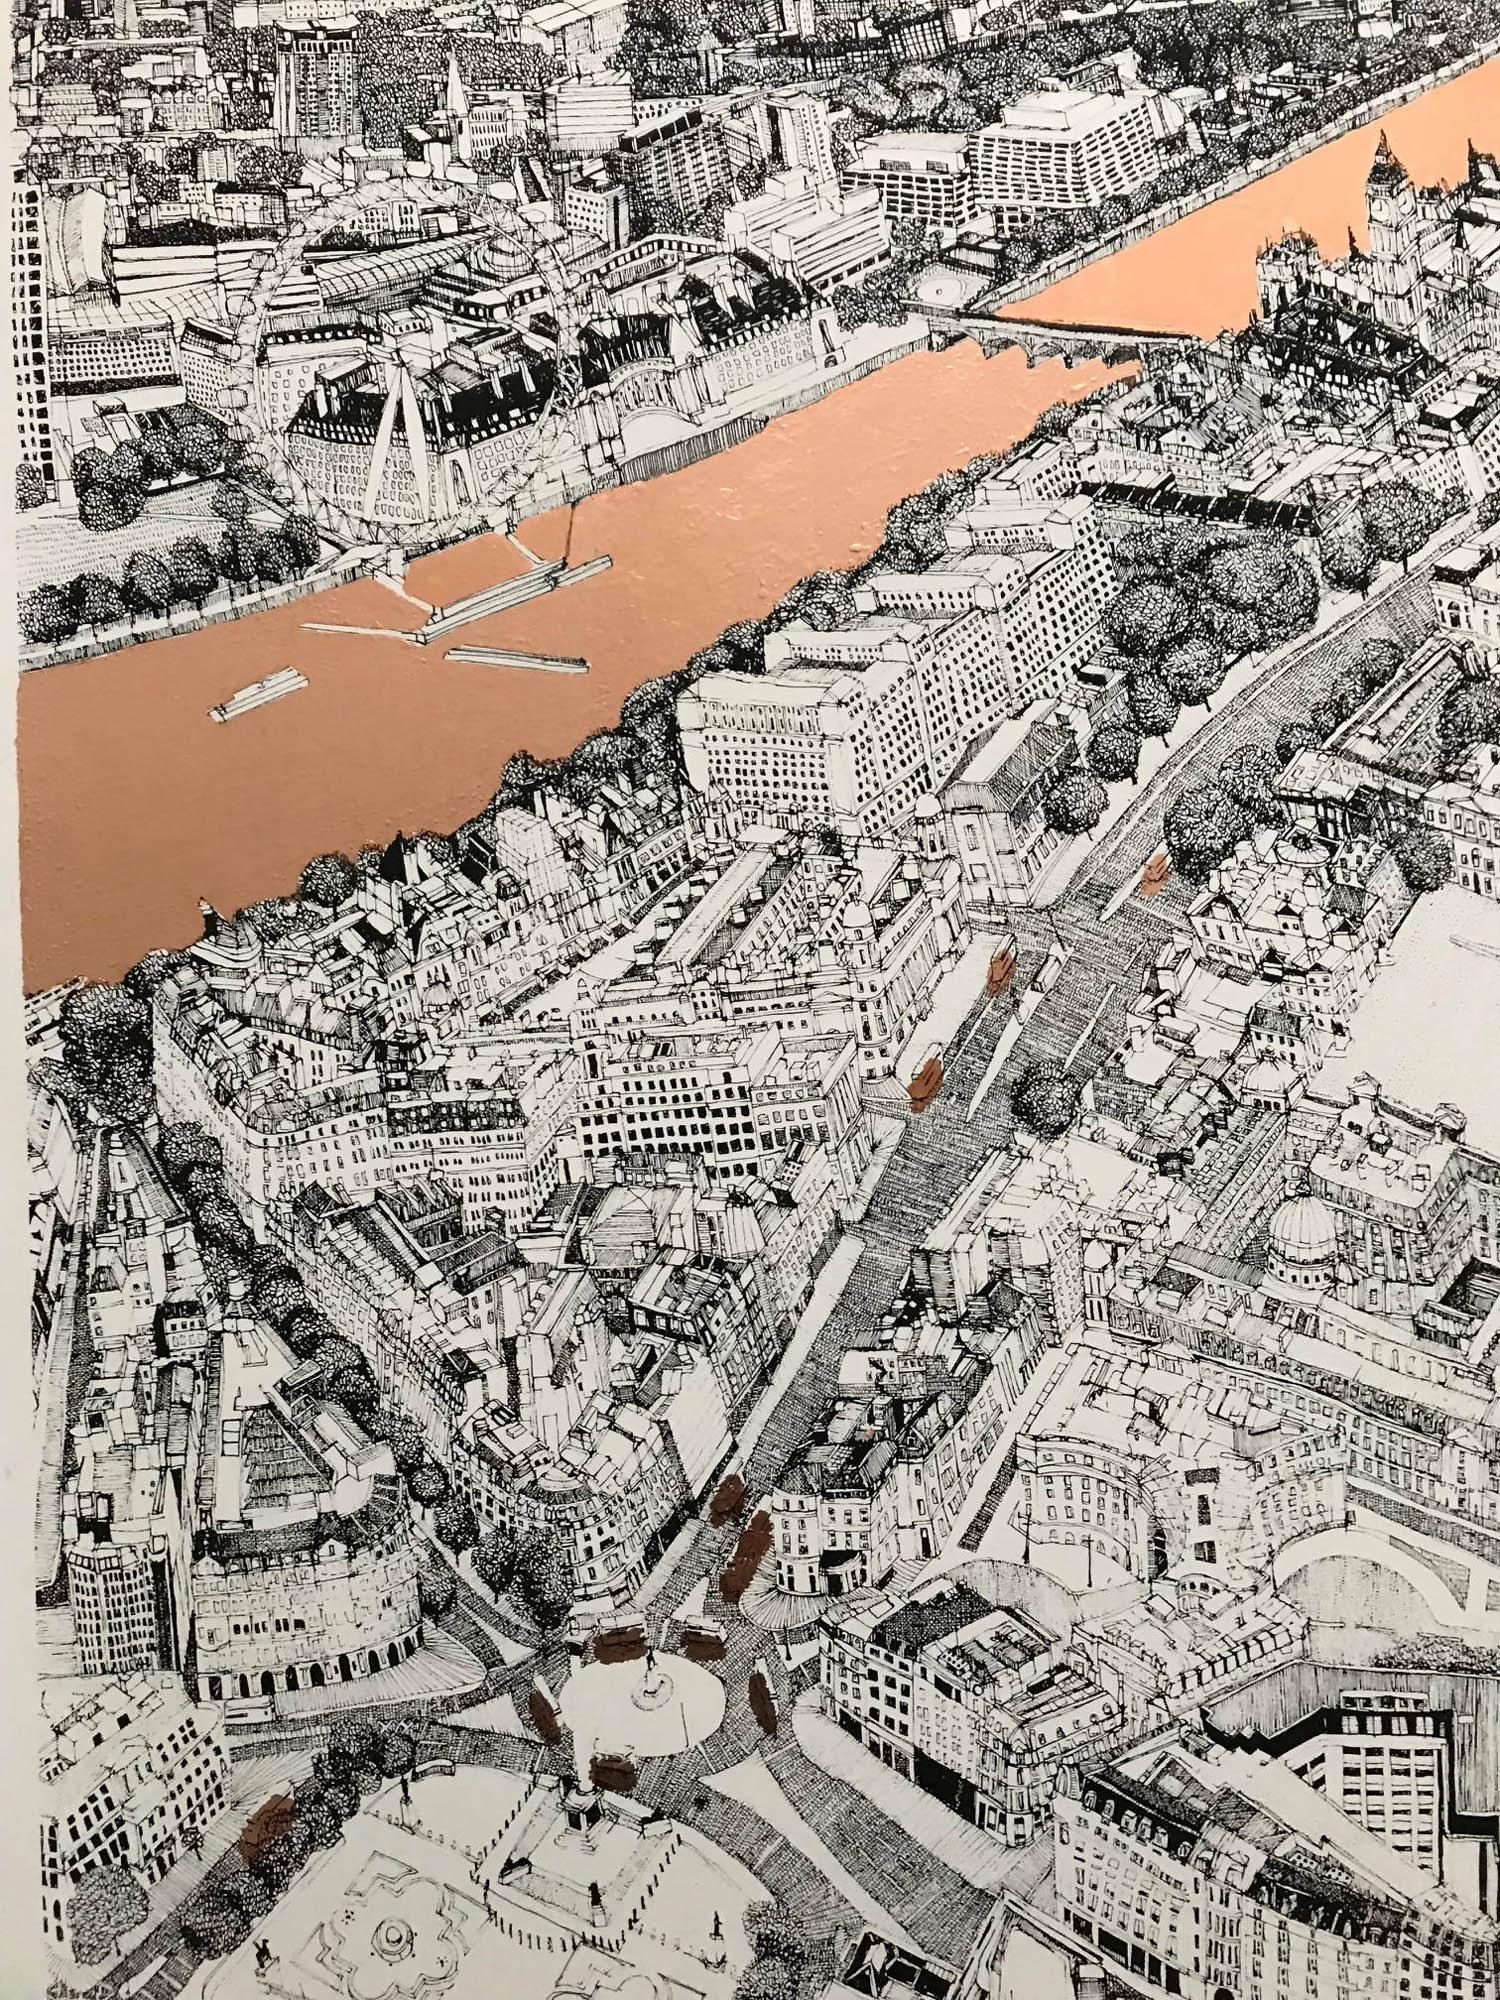 Southbank Shimmer
Clare Halifax
Limited edition print of an aerial view of London encompassing well known locations through a 2 colour screen print with hand gilded copper leaf finish for the thames river running through. Image size 70x70cm, paper